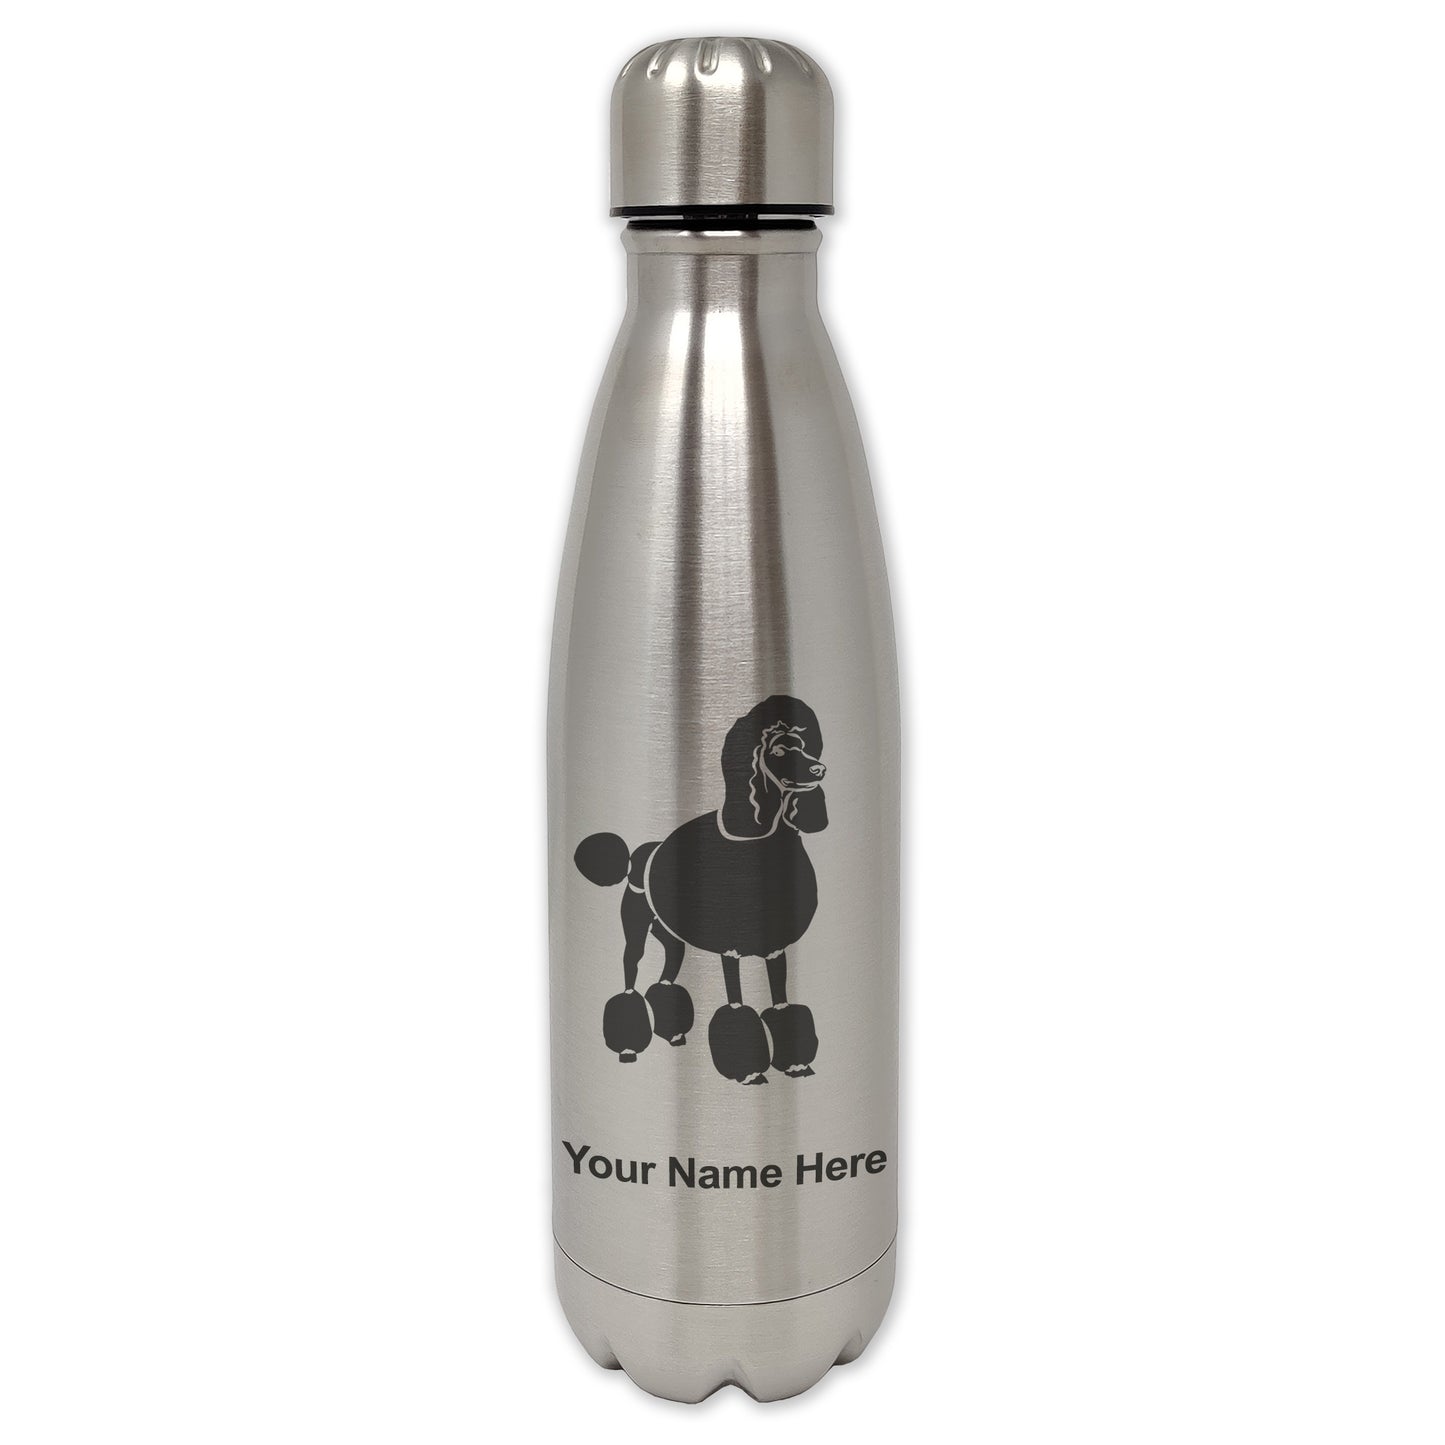 LaserGram Double Wall Water Bottle, French Poodle Dog, Personalized Engraving Included